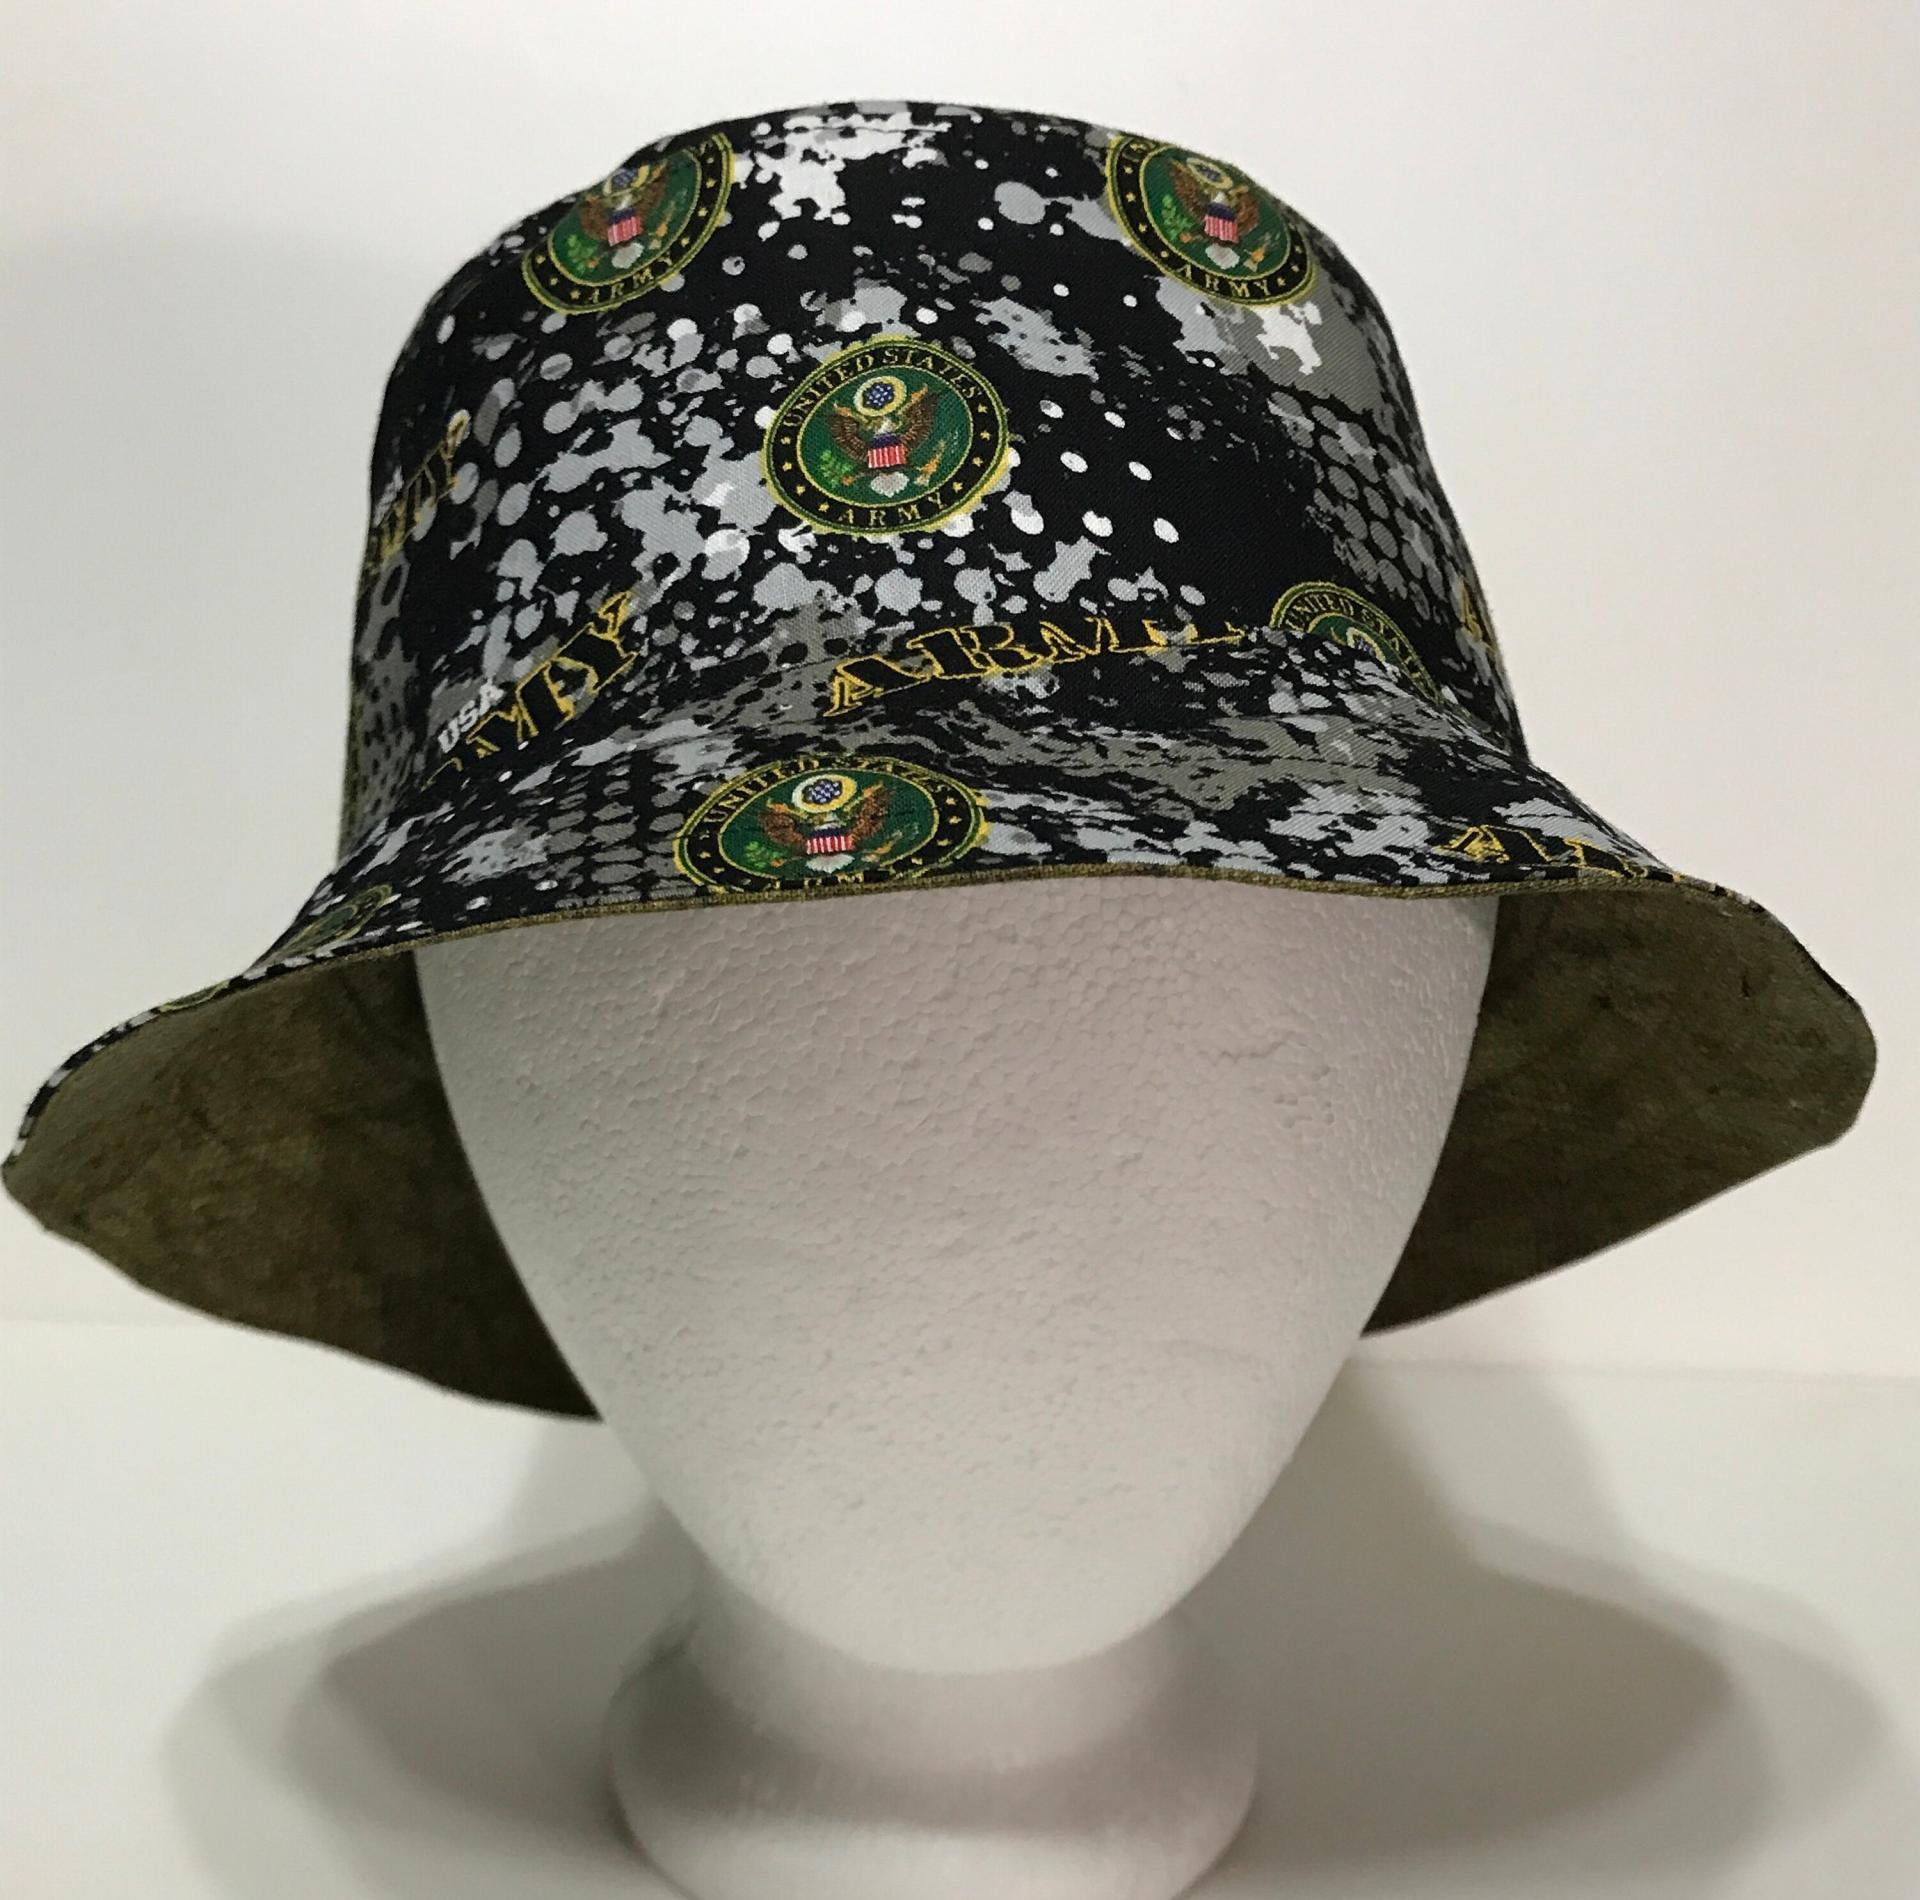 US Army Bucket Hat, Reversible, Military Theme, Handmade, Sizes S-XXL, cotton, floppy hat, fishing hat, sun hat, casual hat